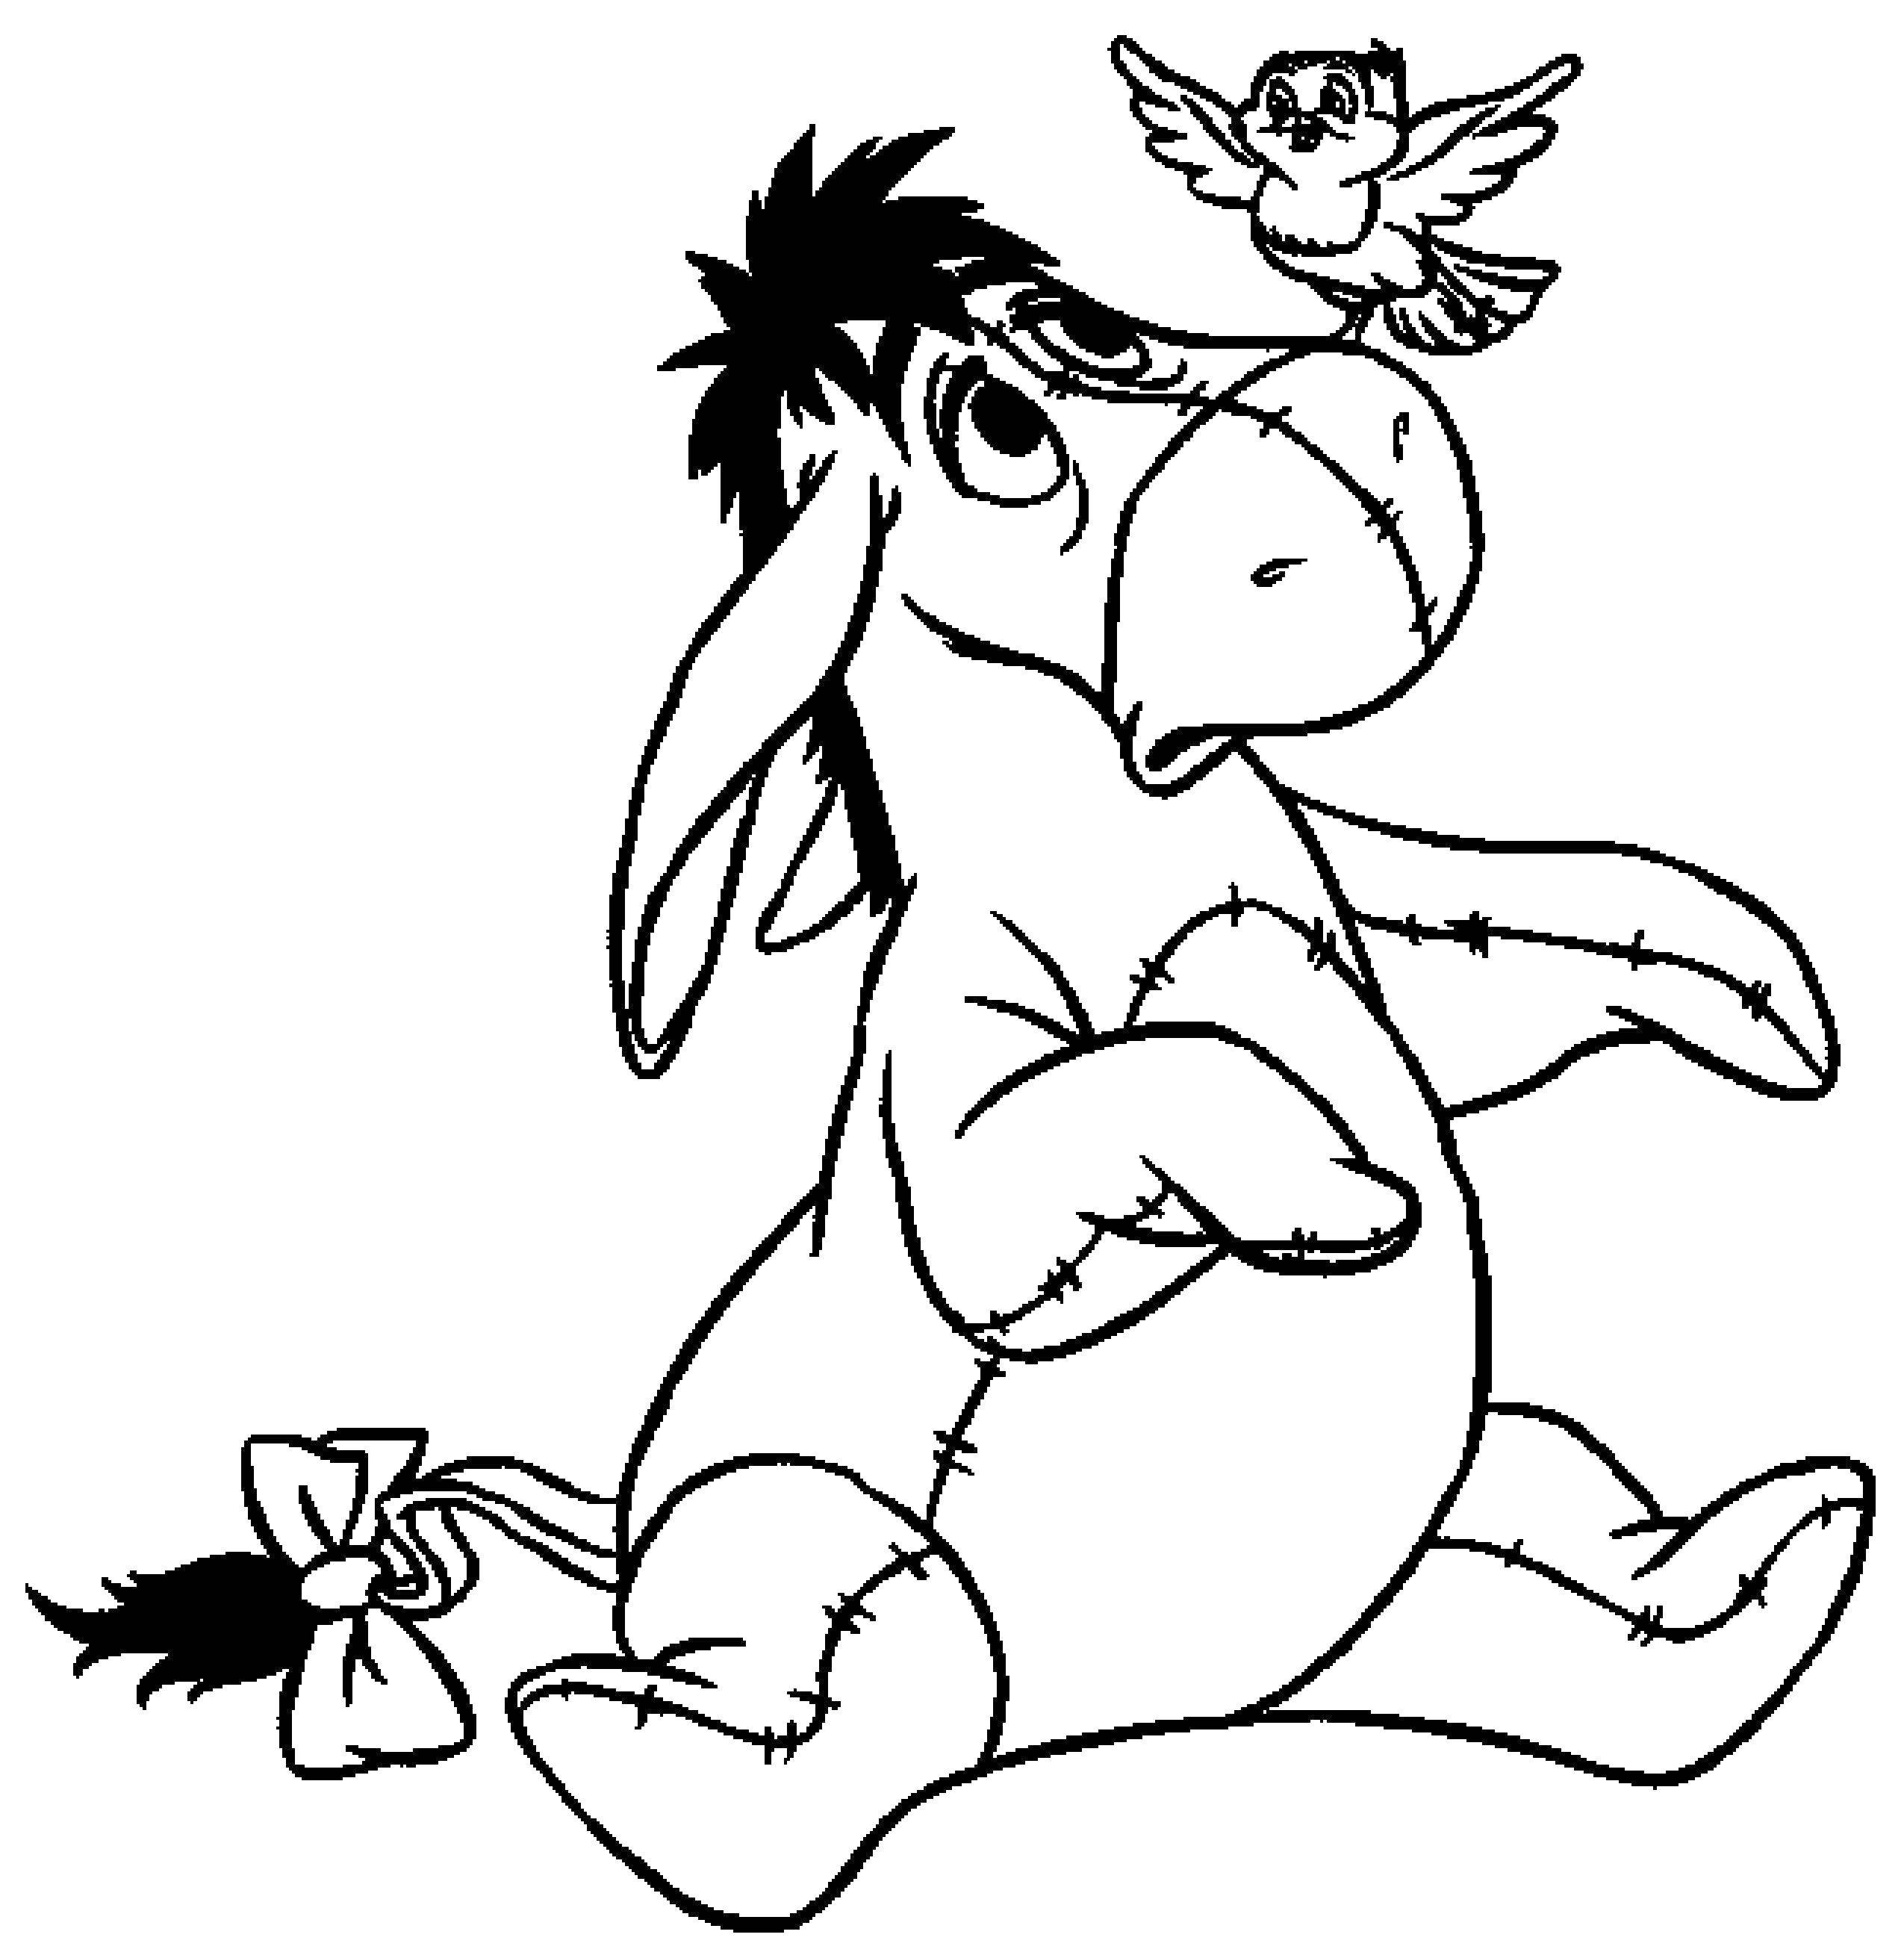 Coloring Donkey with a bird. Category Winnie the Pooh. Tags:  Winnie the Pooh, cartoon, donkey.